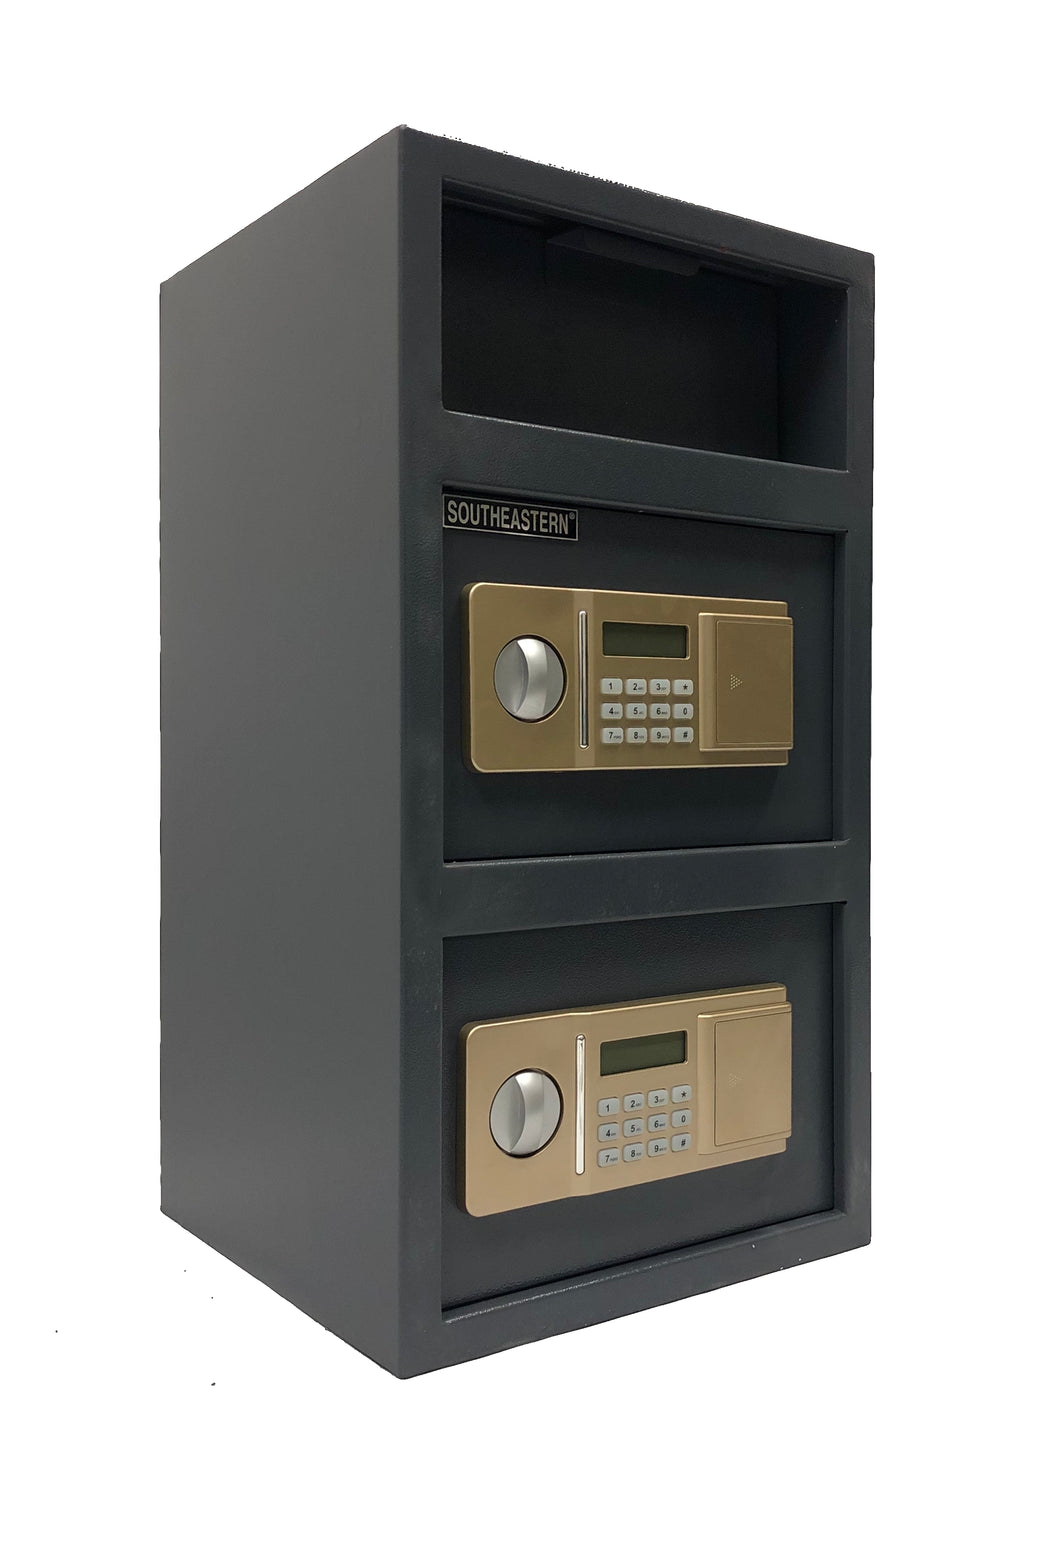 SOUTHEASTERN F2614EEVN Double Door Money Drop Depository Safe with Quick Access Electronic Lock & Back up Key